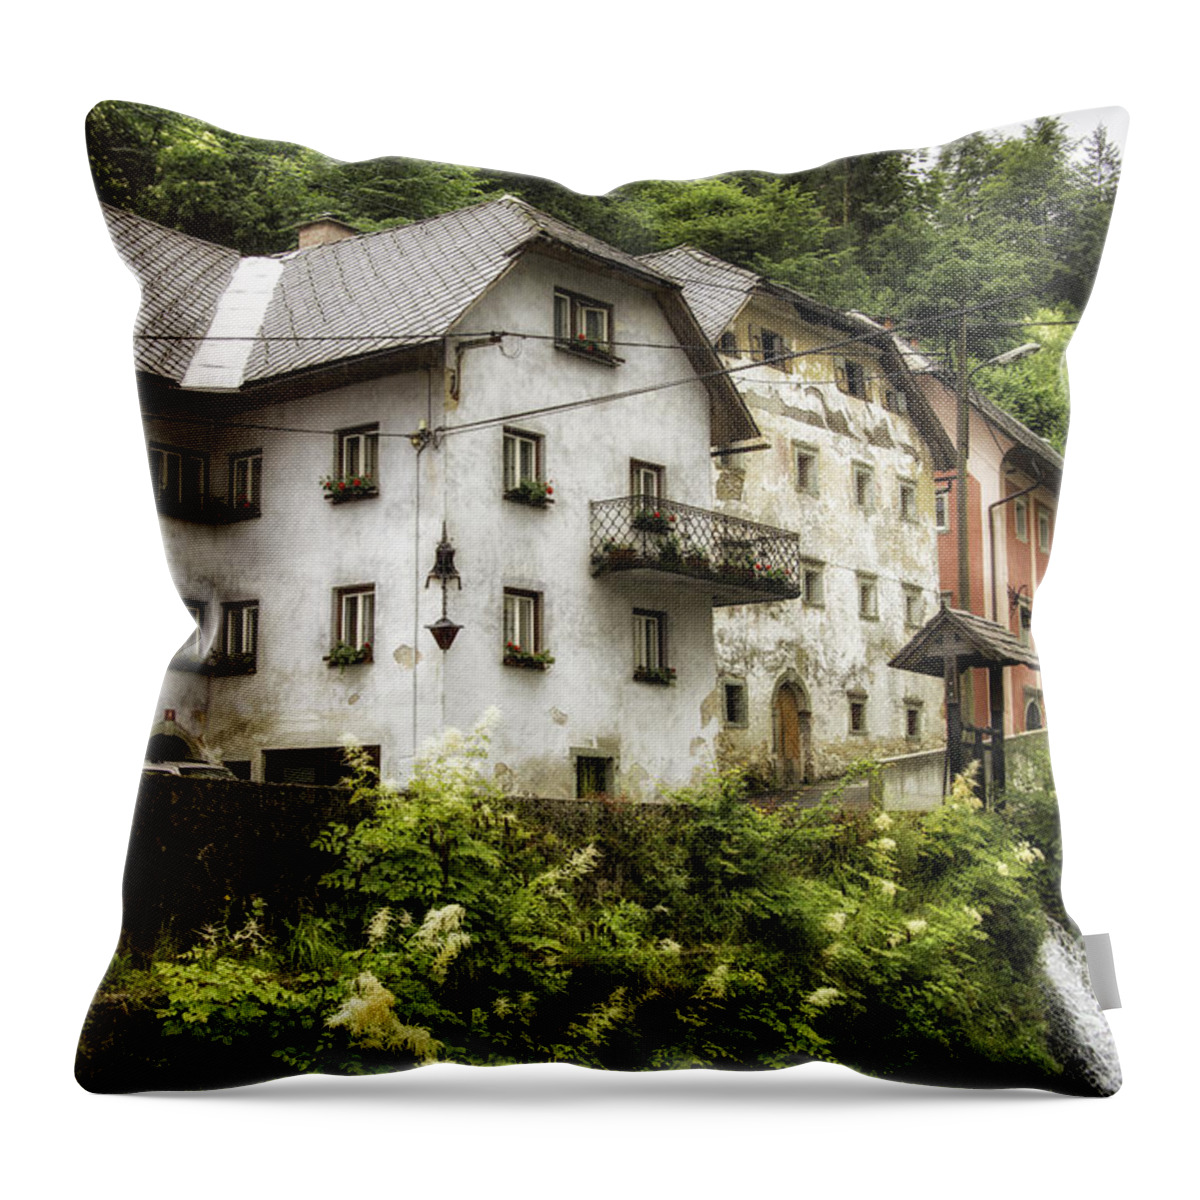 Croatia Throw Pillow featuring the photograph Croatia Village by Timothy Hacker